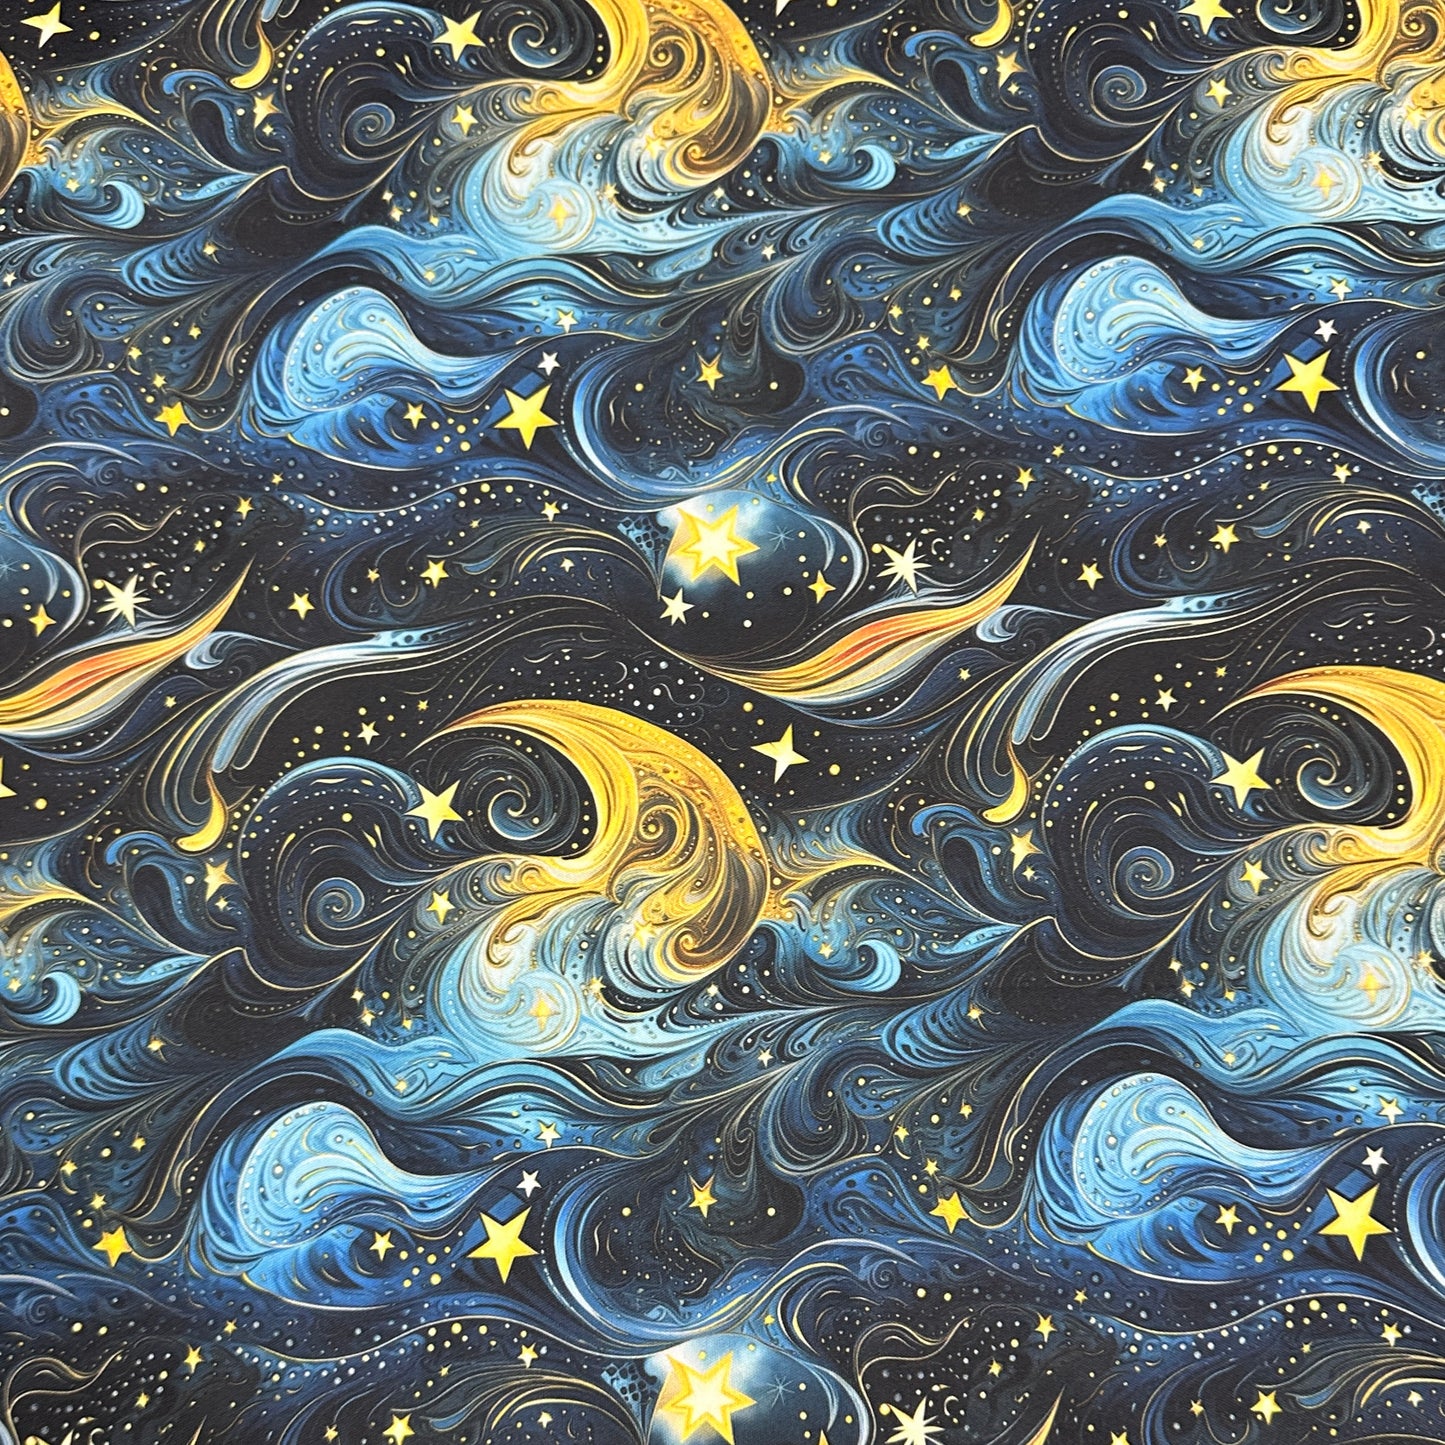 Golden Starry Sky 1 mil PUL Fabric - Made in the USA